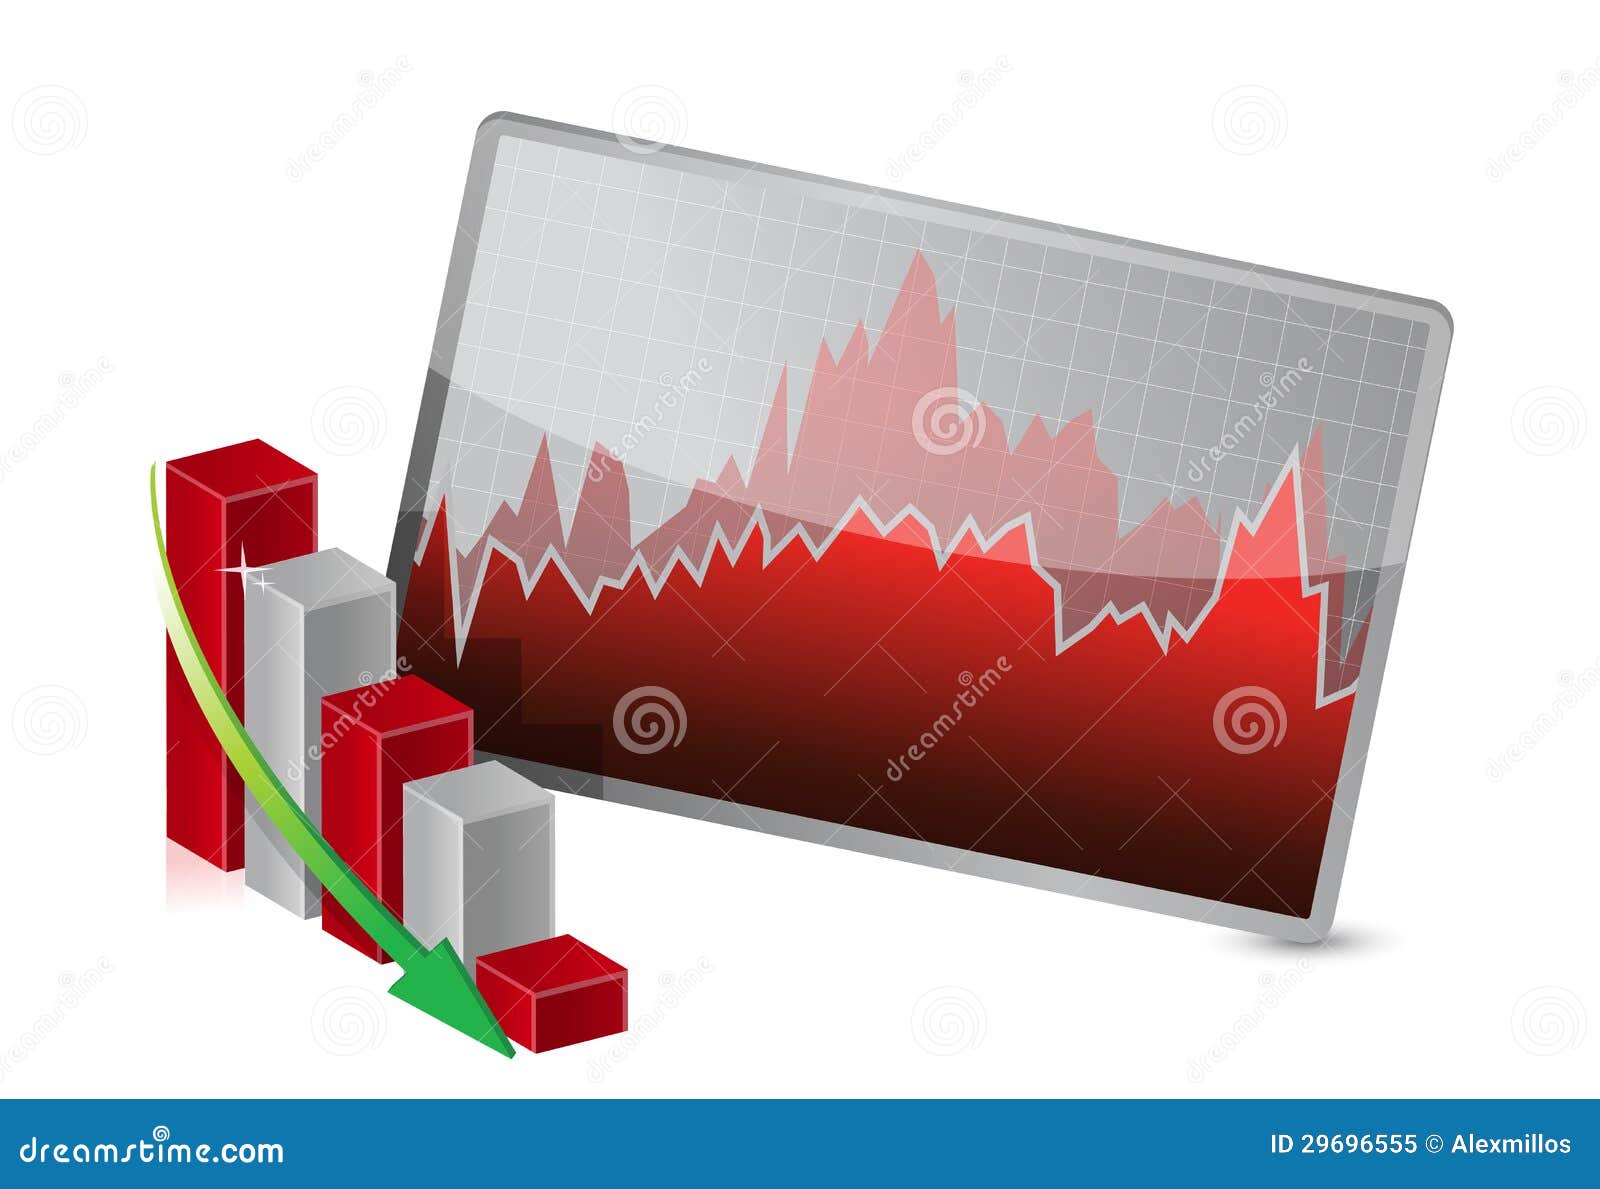 business graph with stocks showing losses